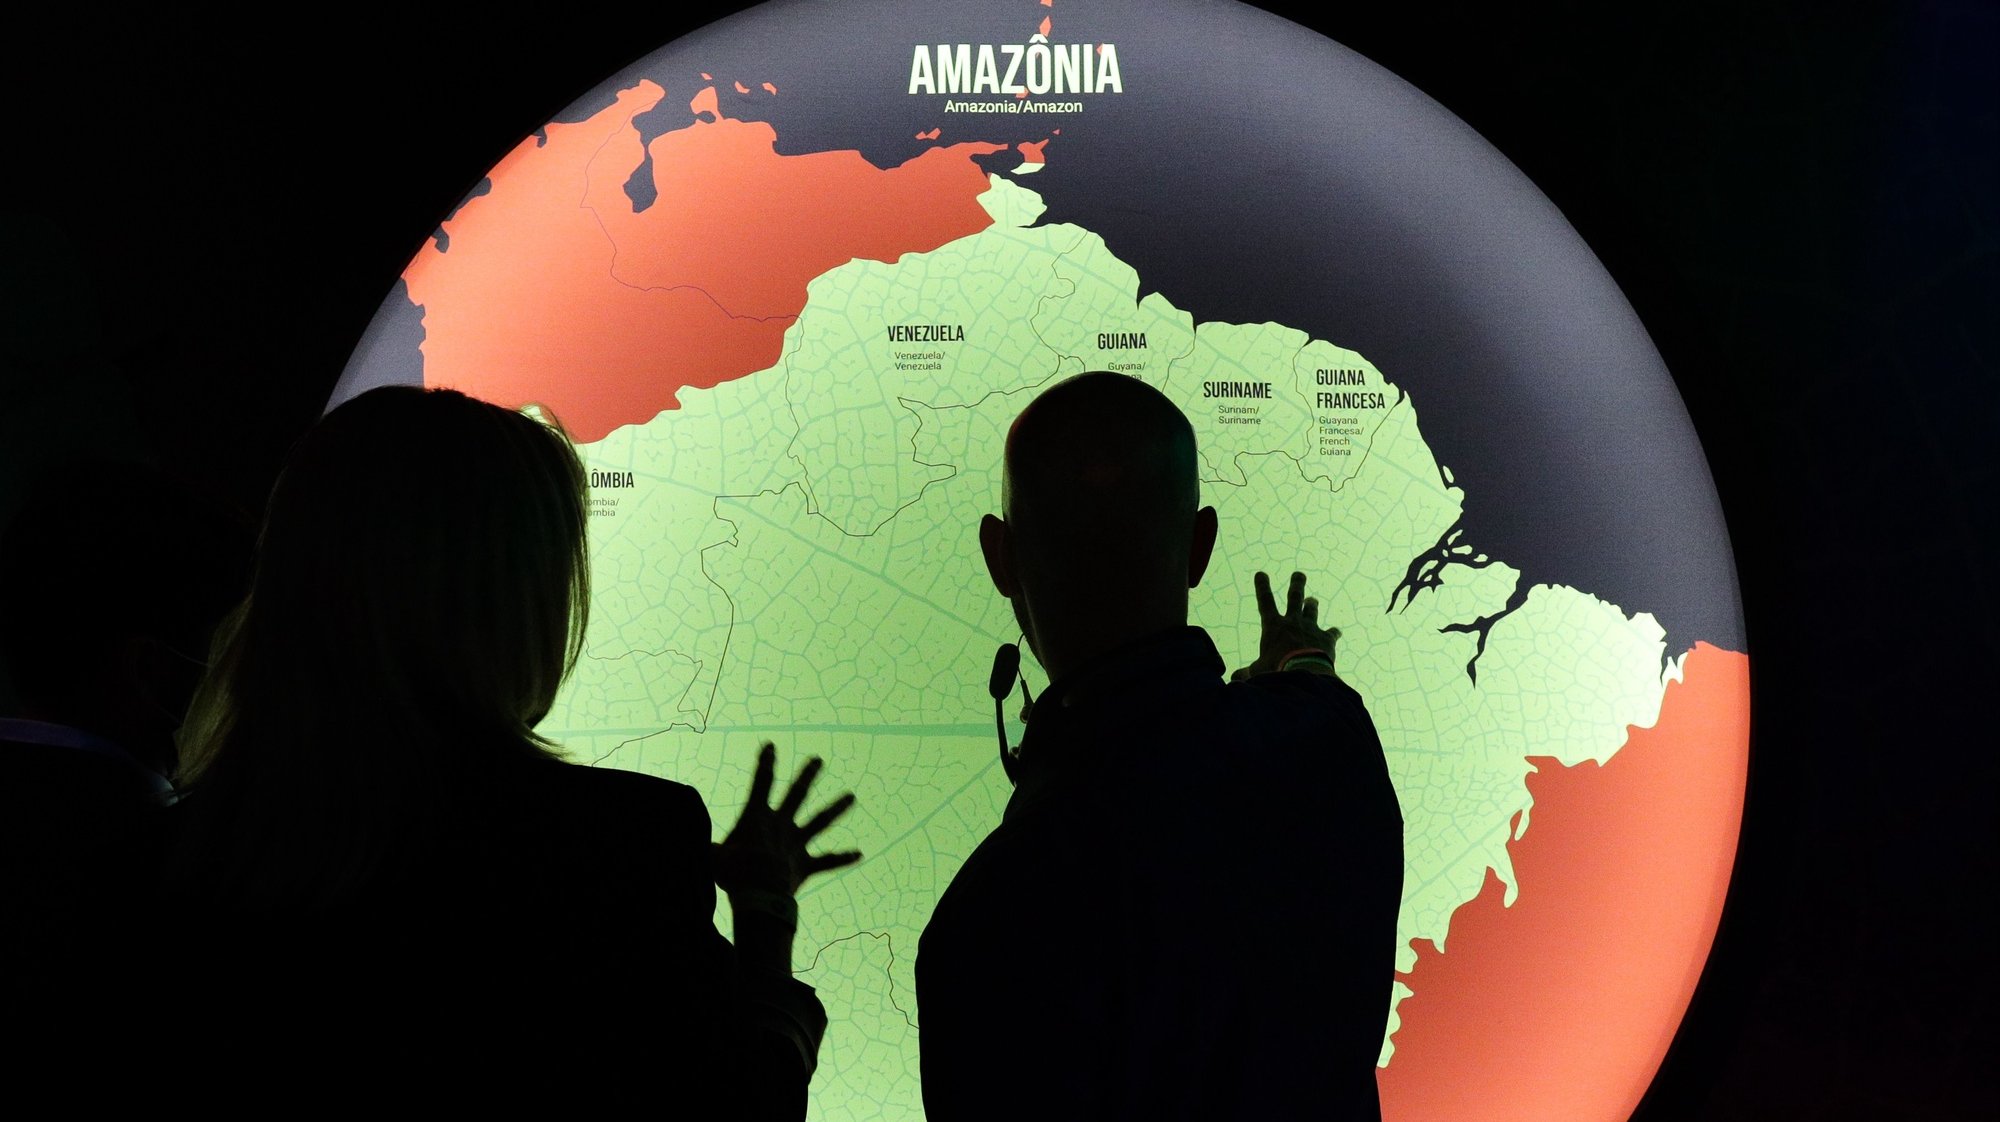 epa09646878 Visitors enjoy a tour prior to the opening of the exhibition &#039;Fruturos - Tempos Amazonicos&#039; (Fruits - Amazon Times) at the Amanha Museum in Rio de Janeiro, Brazil, 16 December 2021 (issued 17 December 2021). The immensity of the Amazon, its richness, the ethnic groups that live there and their customs, are part of an exhibition in Rio de Janeiro that from 17 December on immerses the viewer in the reality of the most extensive tropical forest on the planet to highlight the urgency of its conservation. The exhibition &#039;Futures&#039;, which can be seen until June 2022 at the Museum of Tomorrow in Rio, brings an updated perspective of this biome and proposes new challenges to keep the forest standing.  EPA/Andre Coelho